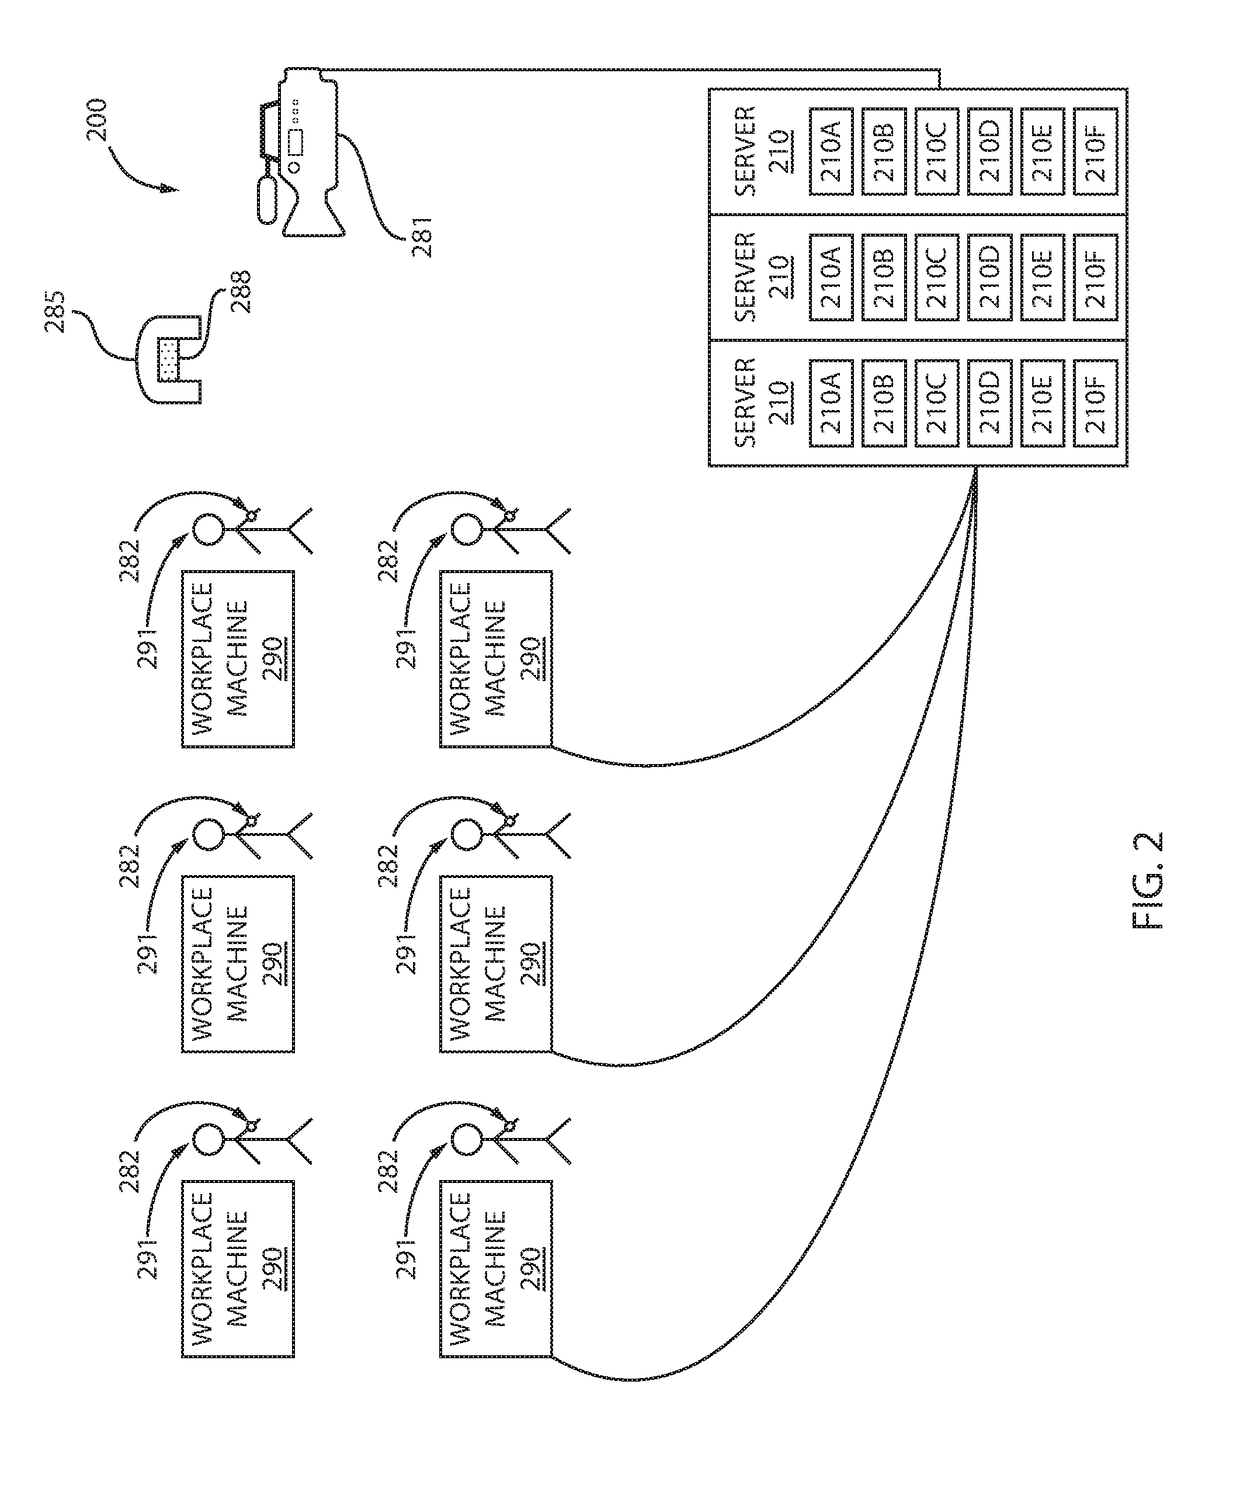 System and method for wearable indication of personal risk within a workplace